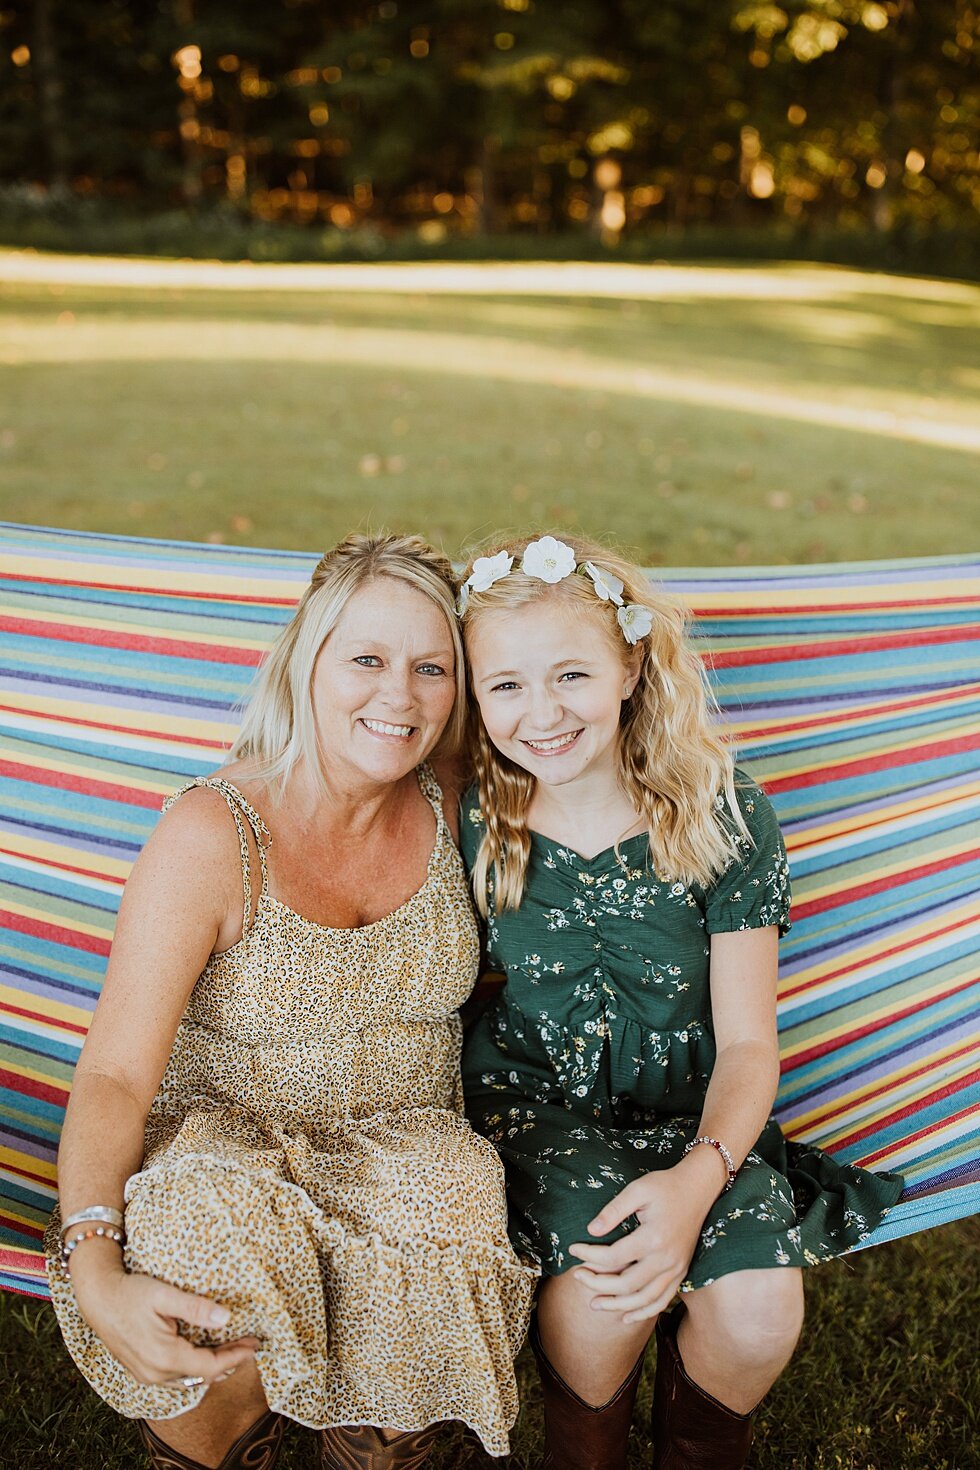  Sitting together in this yard hakim, this mother and daughter duo enjoyed each moment of their photography session. Fall Louisville Kentucky photographer mother daughter photography session portraits loving relationship western girls country roots #